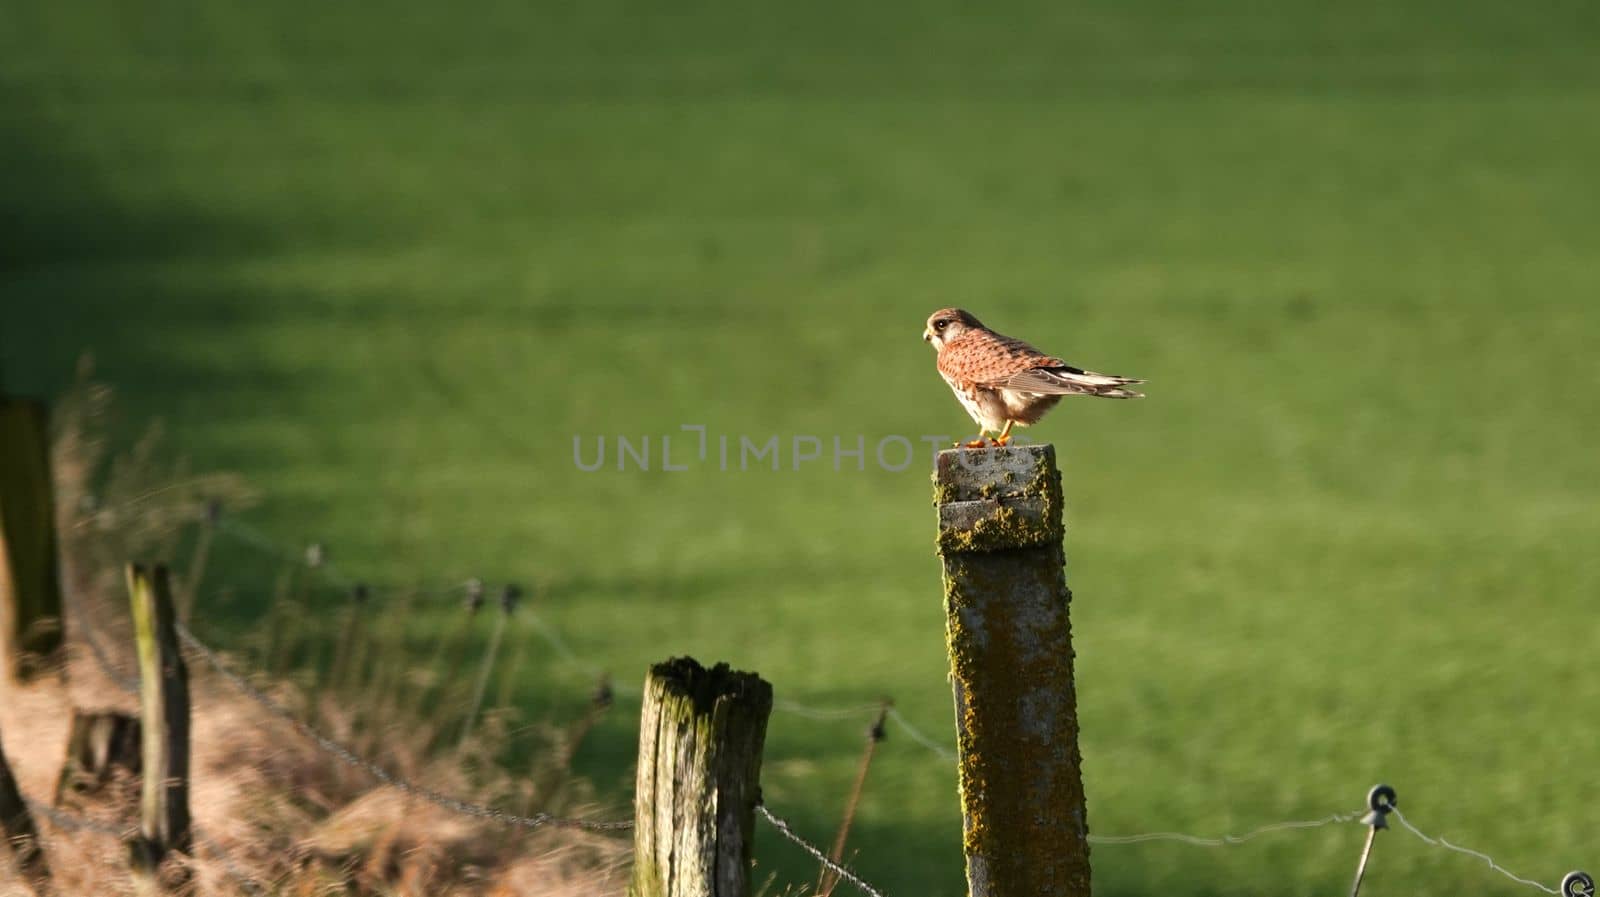 Female common kestrel (Falco tinnunculus) sits on an old concrete pole